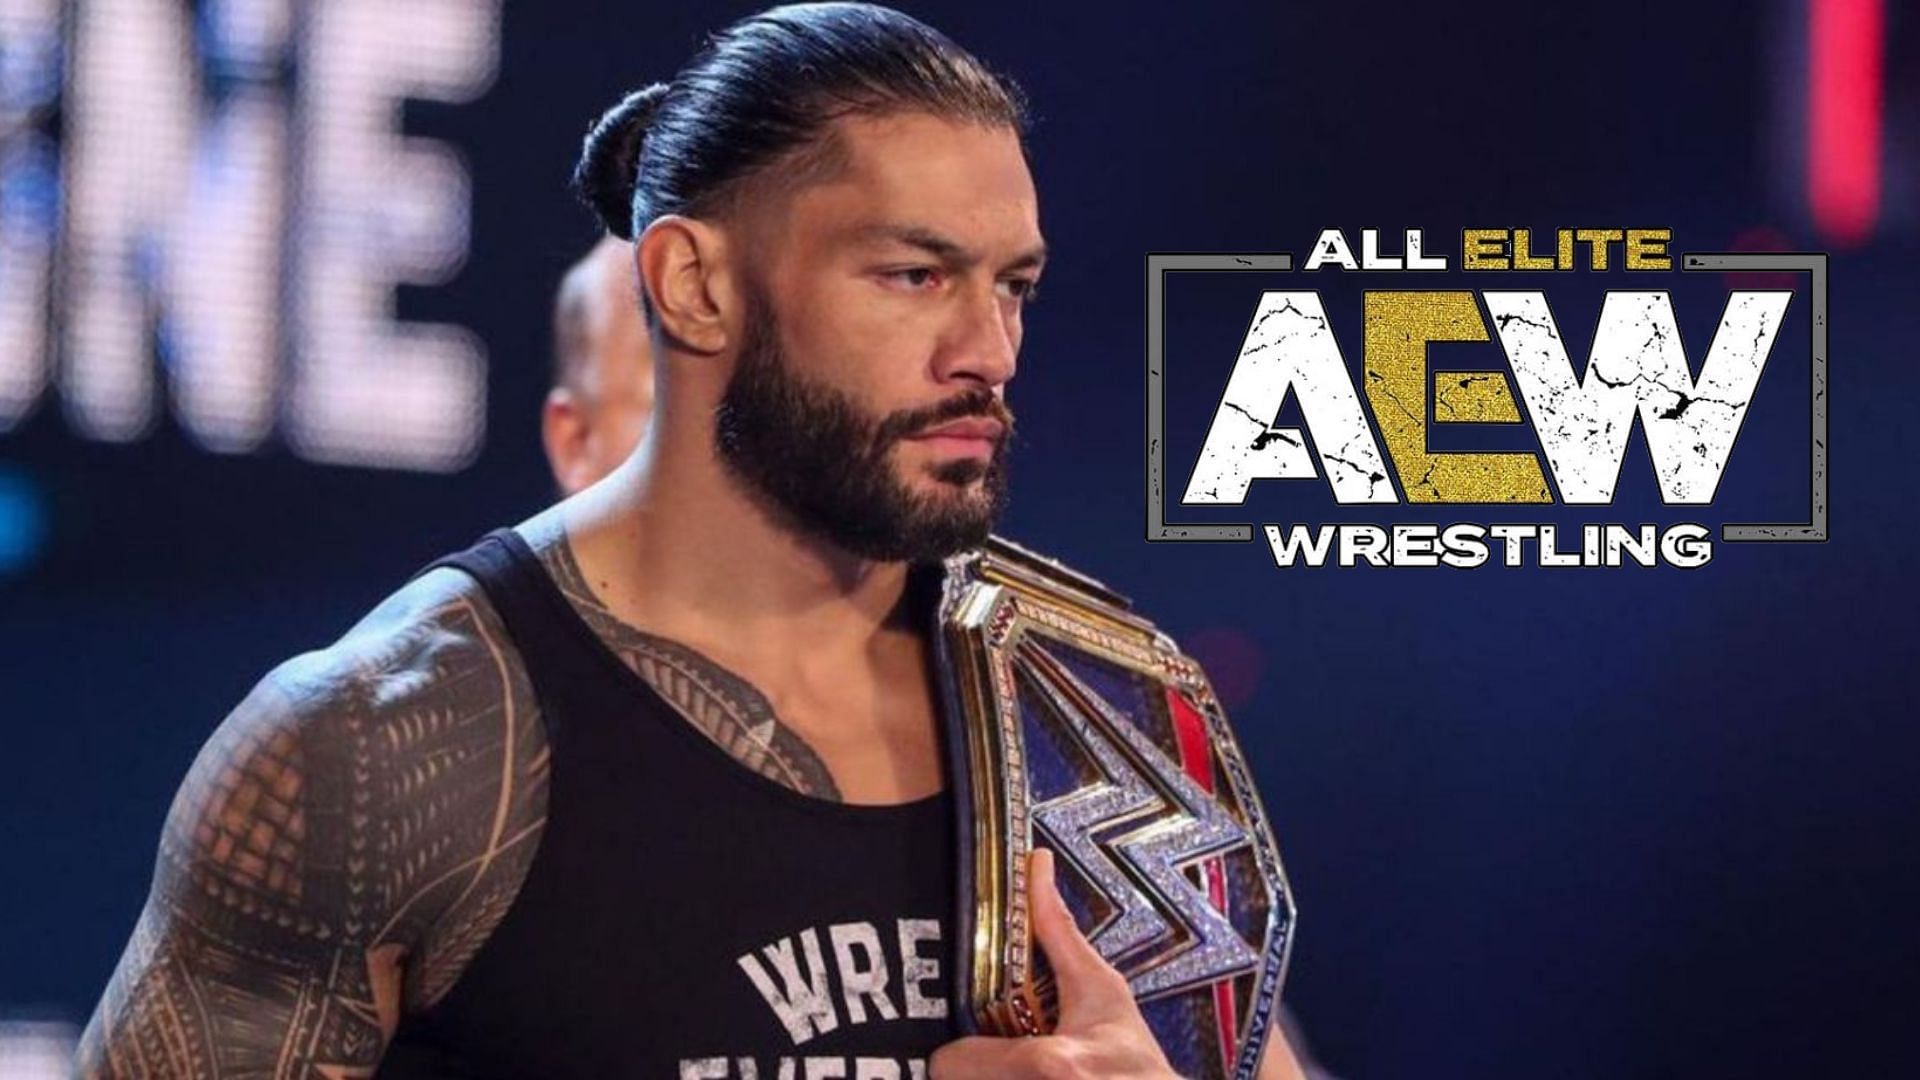 A long-time veteran says this AEW star should take a page out of Roman Reigns